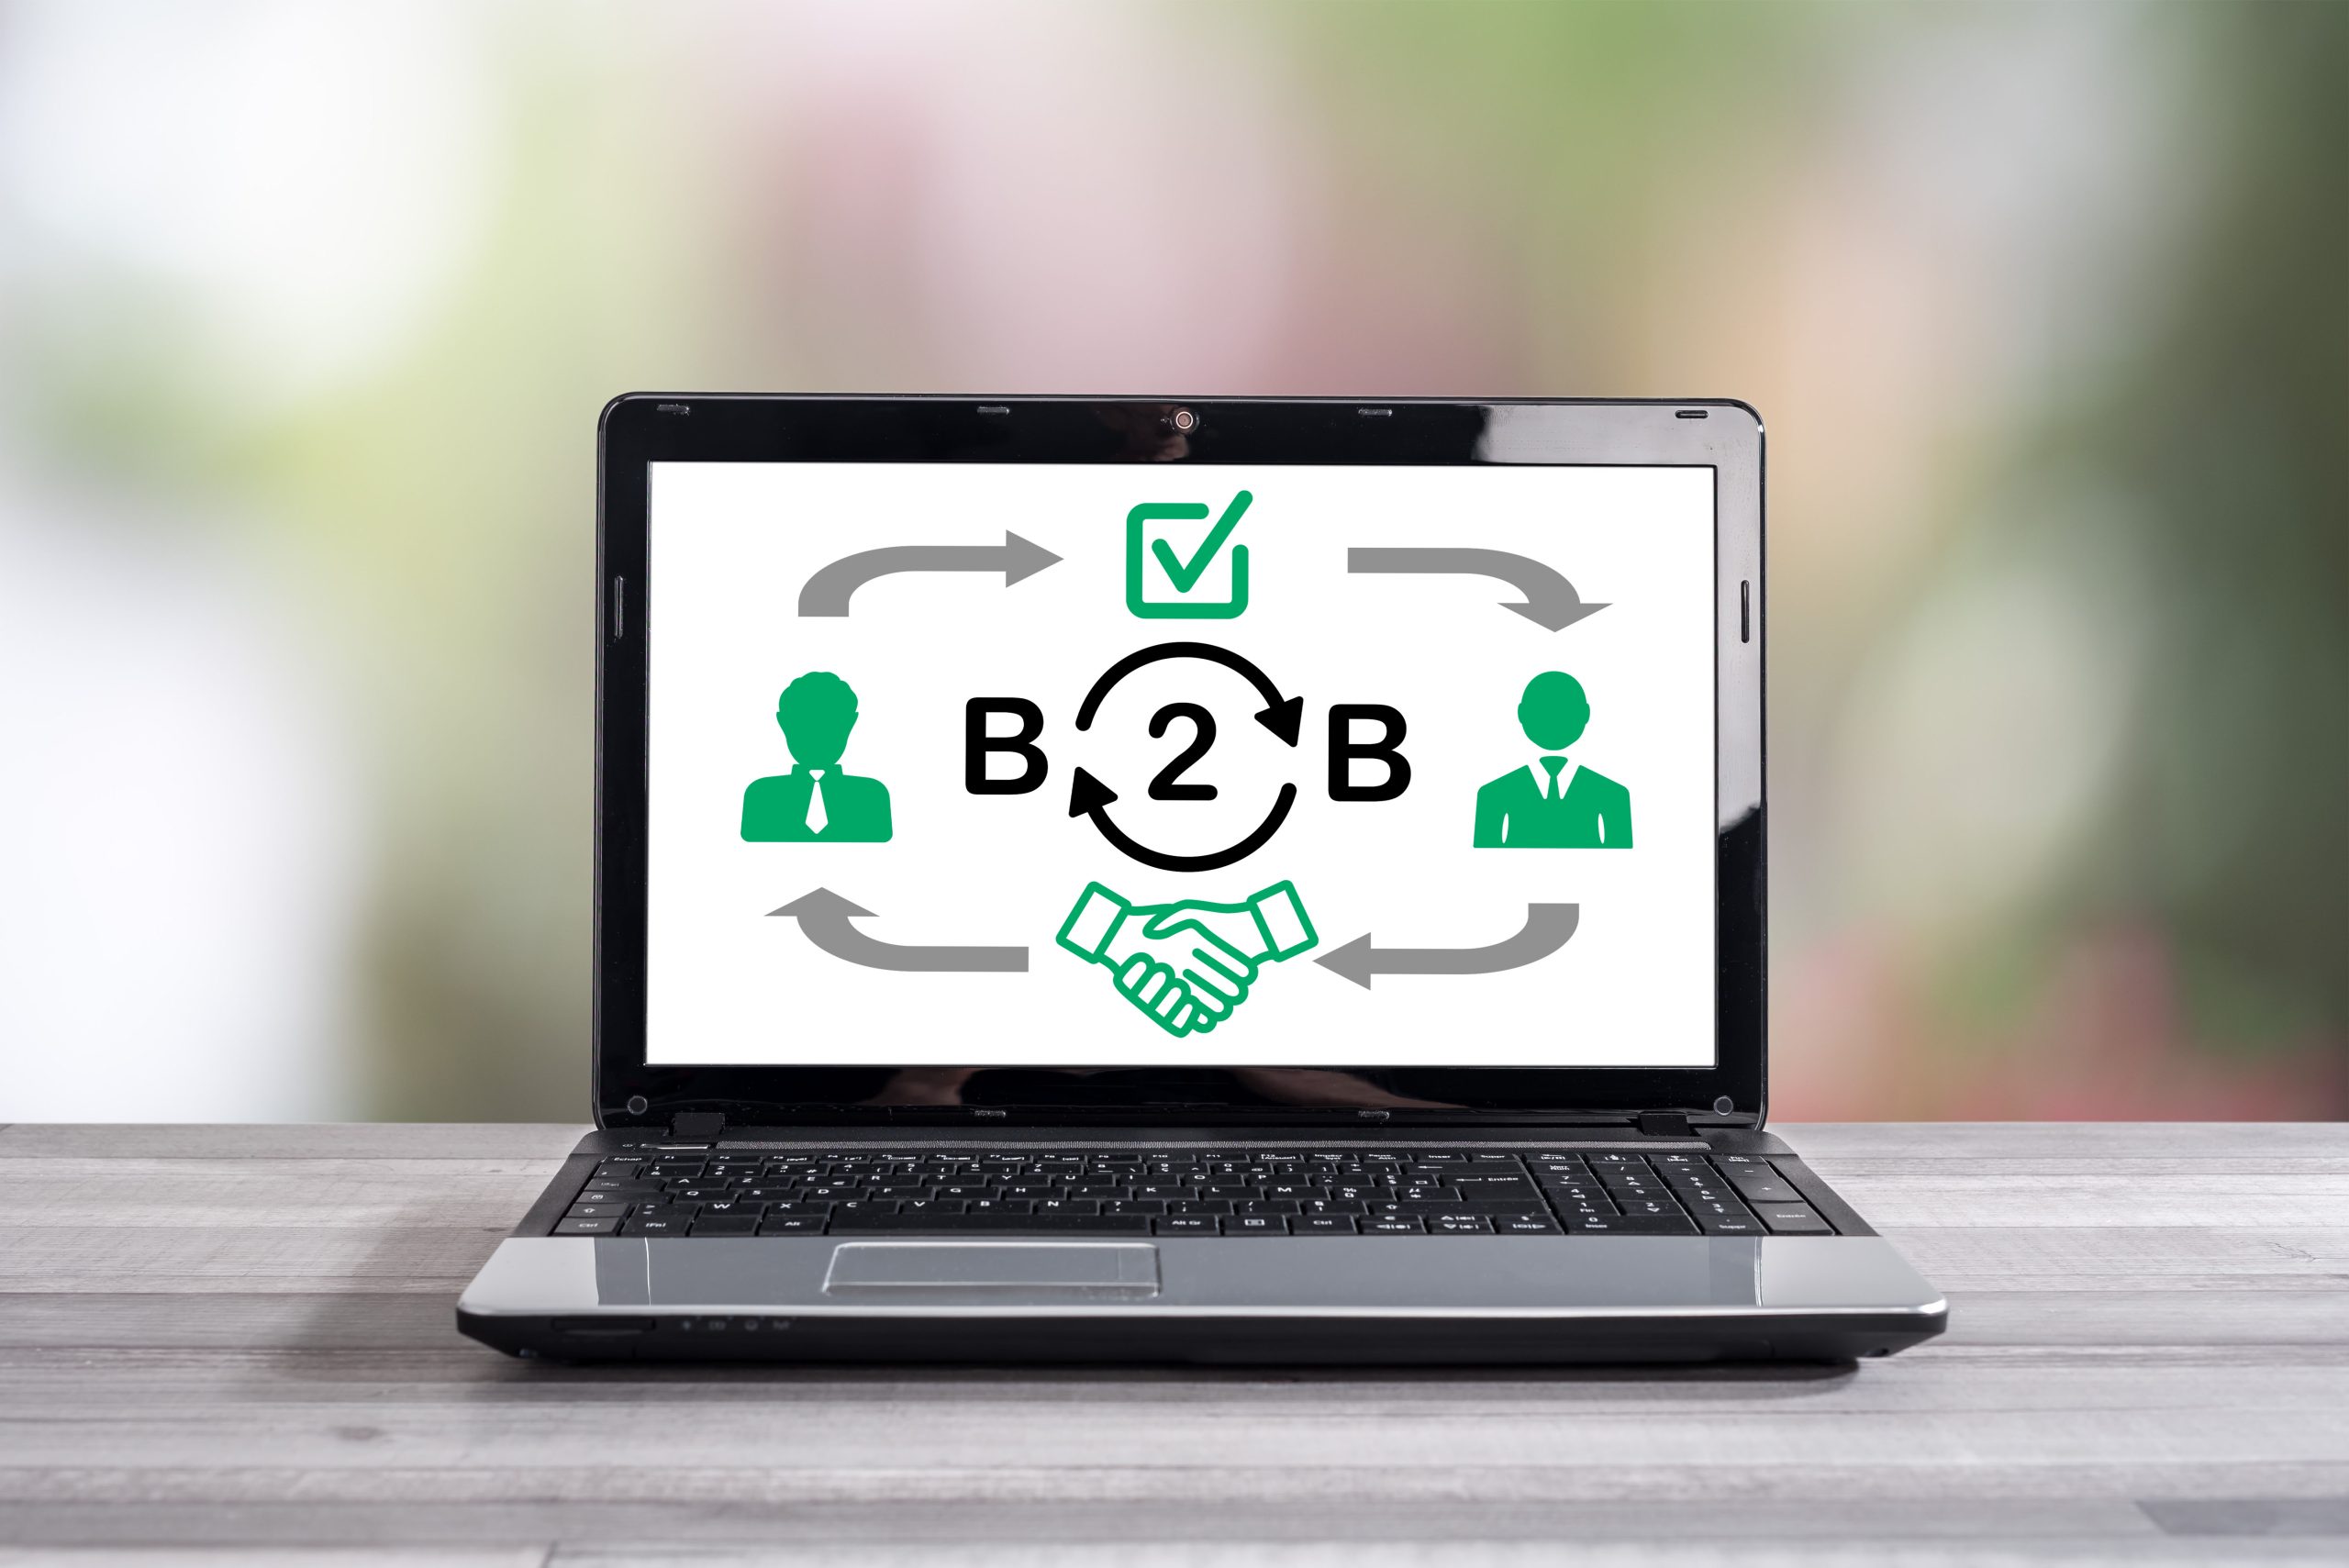 An illustration of B2B business model shown on a laptop